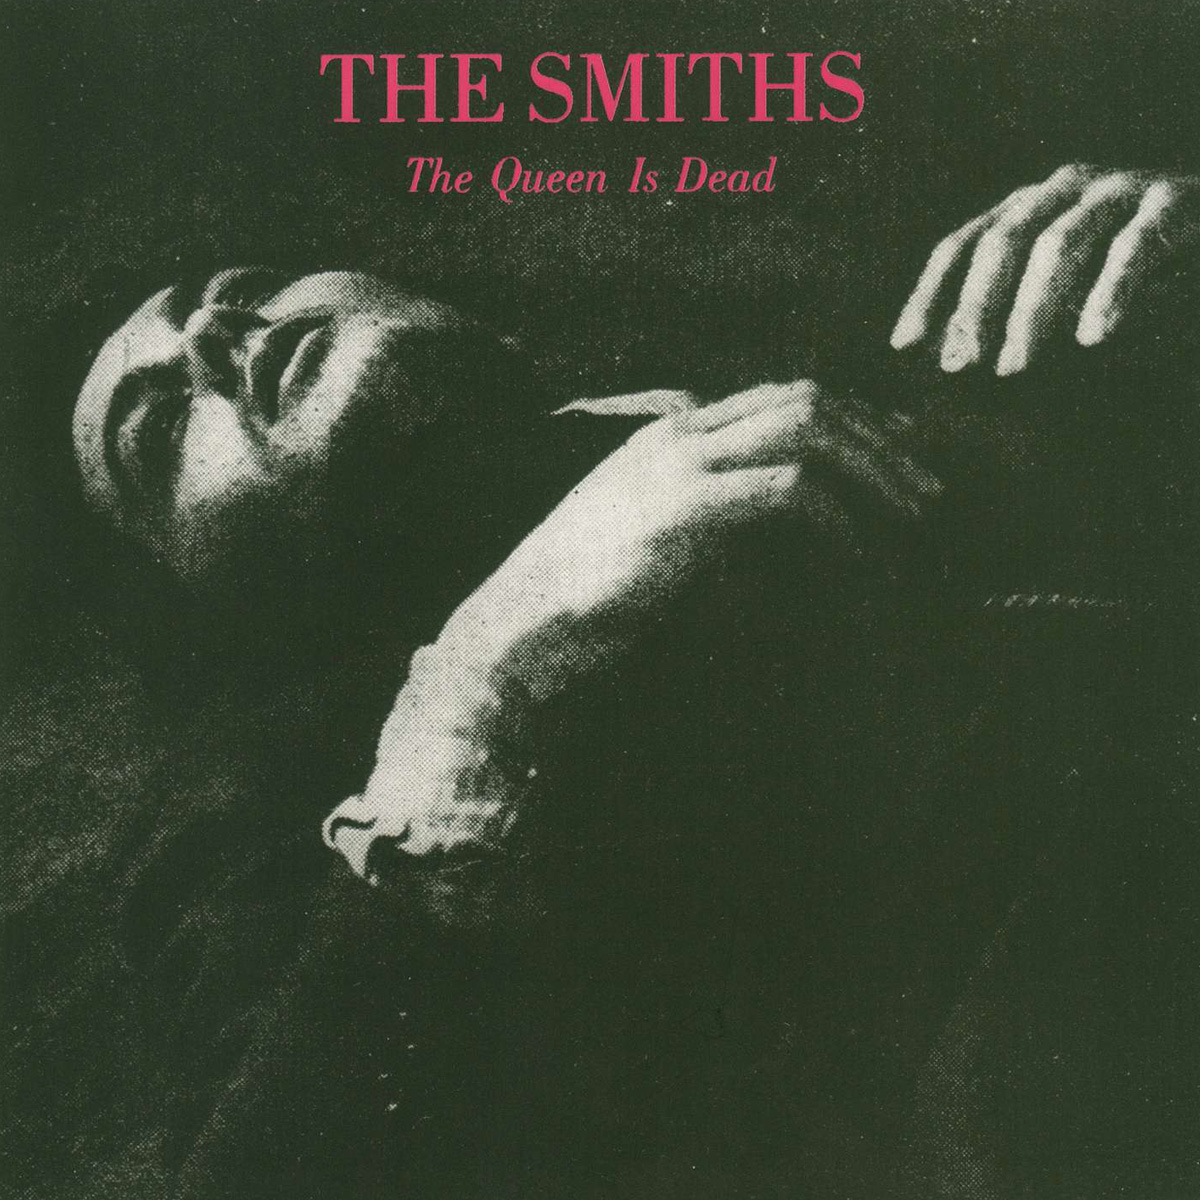 The Queen is Dead Music Album - The Smiths